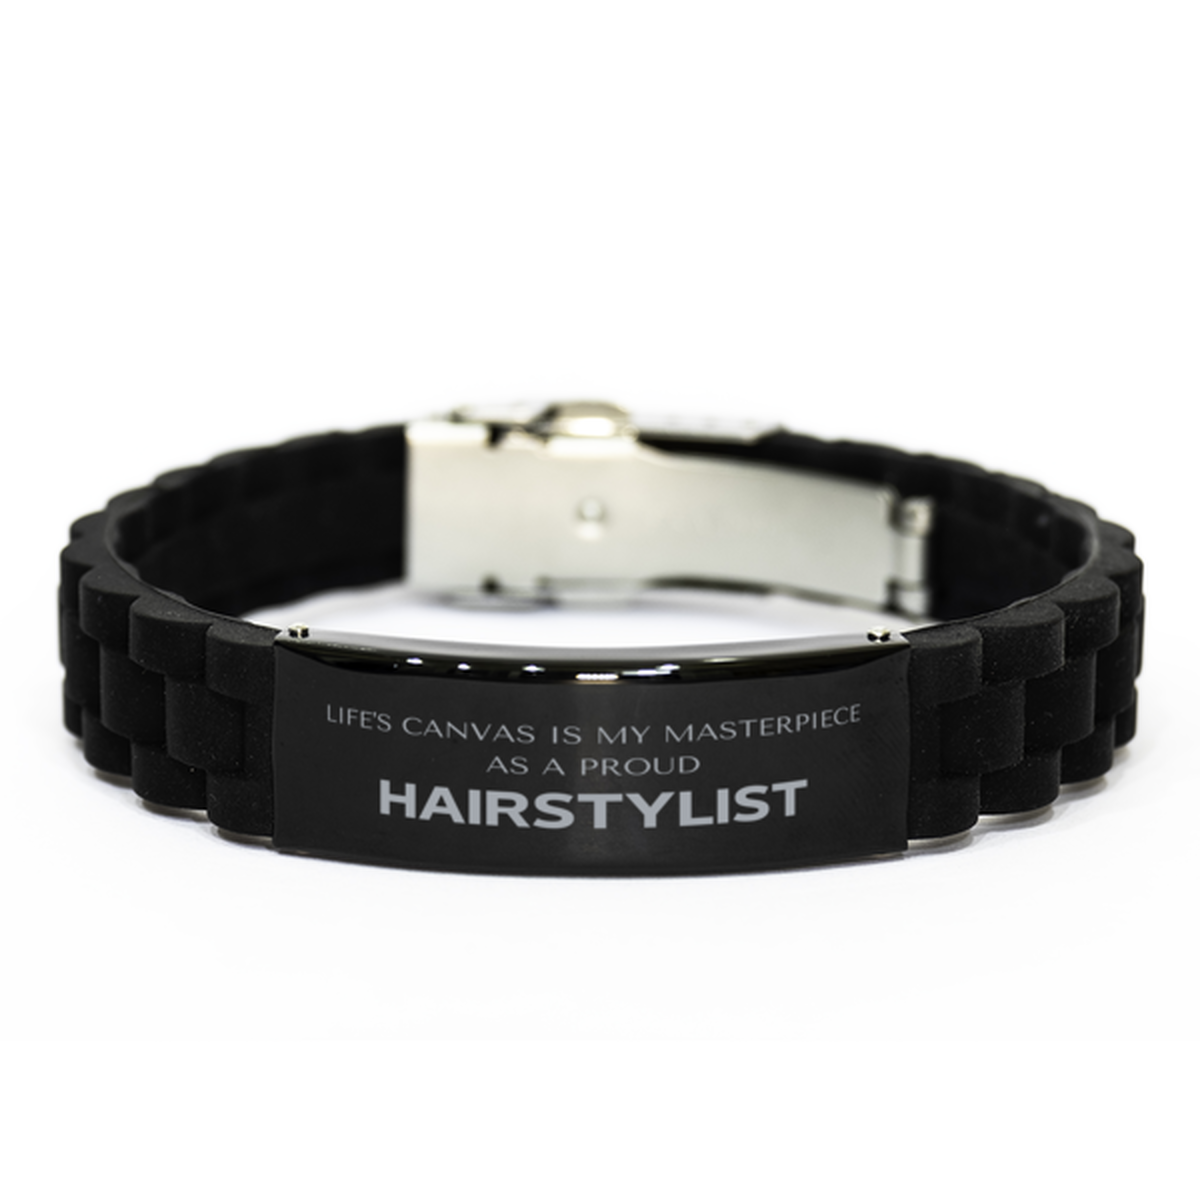 Proud Hairstylist Gifts, Life's canvas is my masterpiece, Epic Birthday Christmas Unique Black Glidelock Clasp Bracelet For Hairstylist, Coworkers, Men, Women, Friends